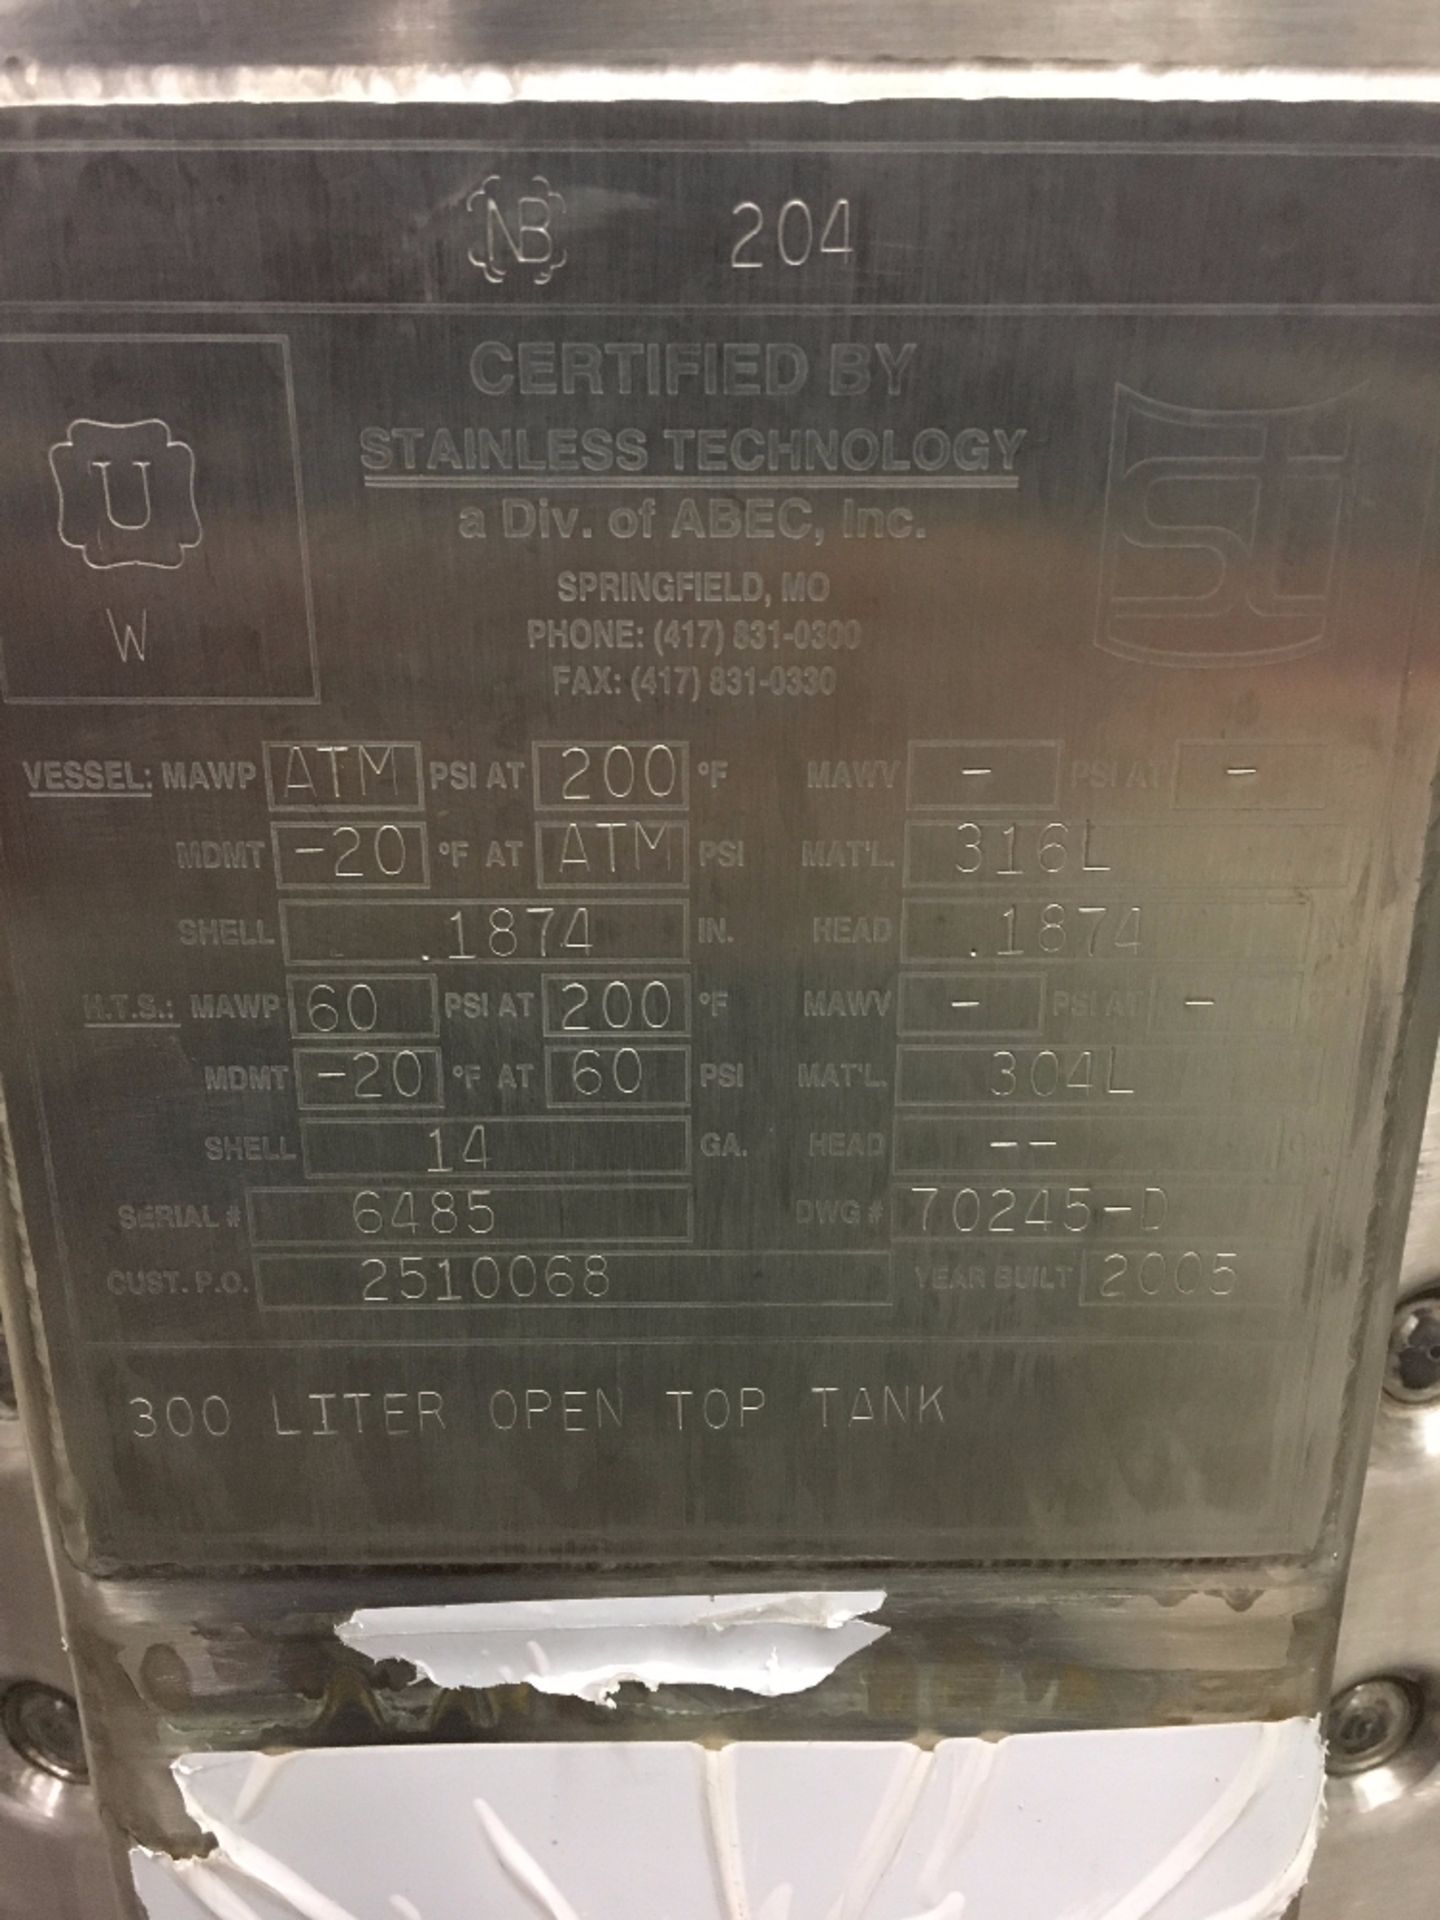 Stainless Technology 300 Liter Open Top Dimpled Tank - Image 2 of 2